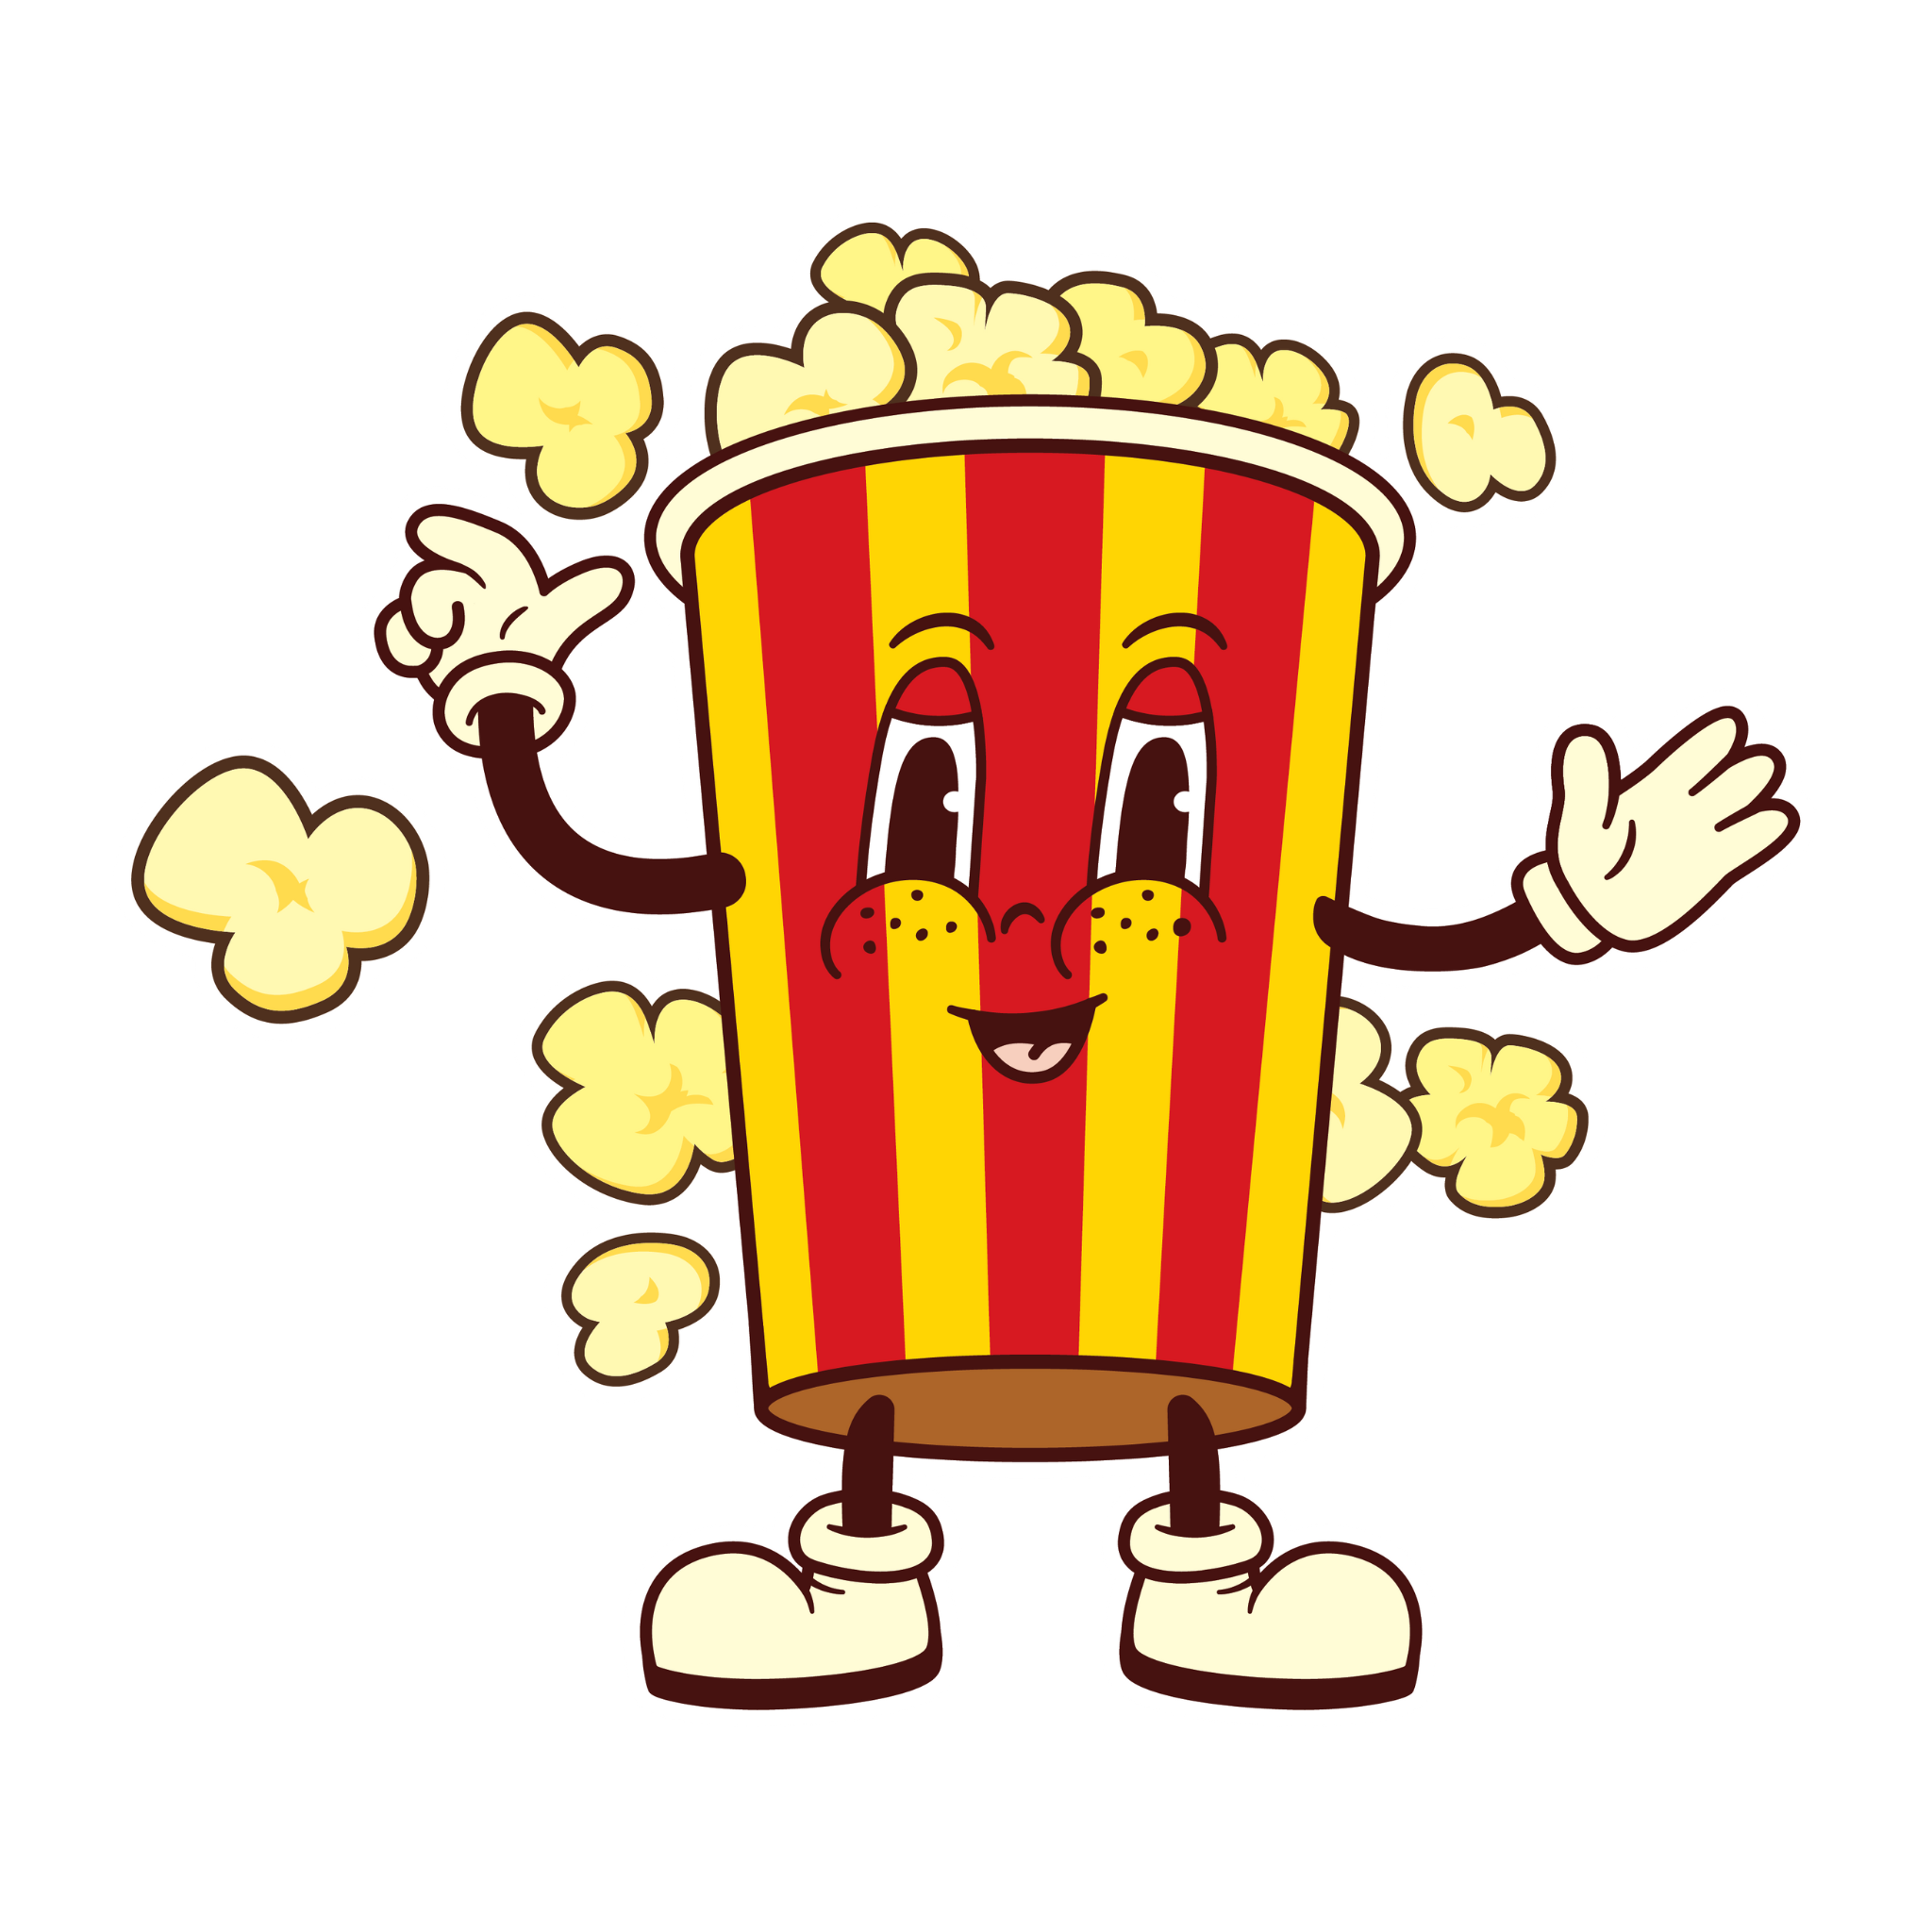 A popcorn bucket with a smiling face, hands, and feet, is throwing popcorn in the air 